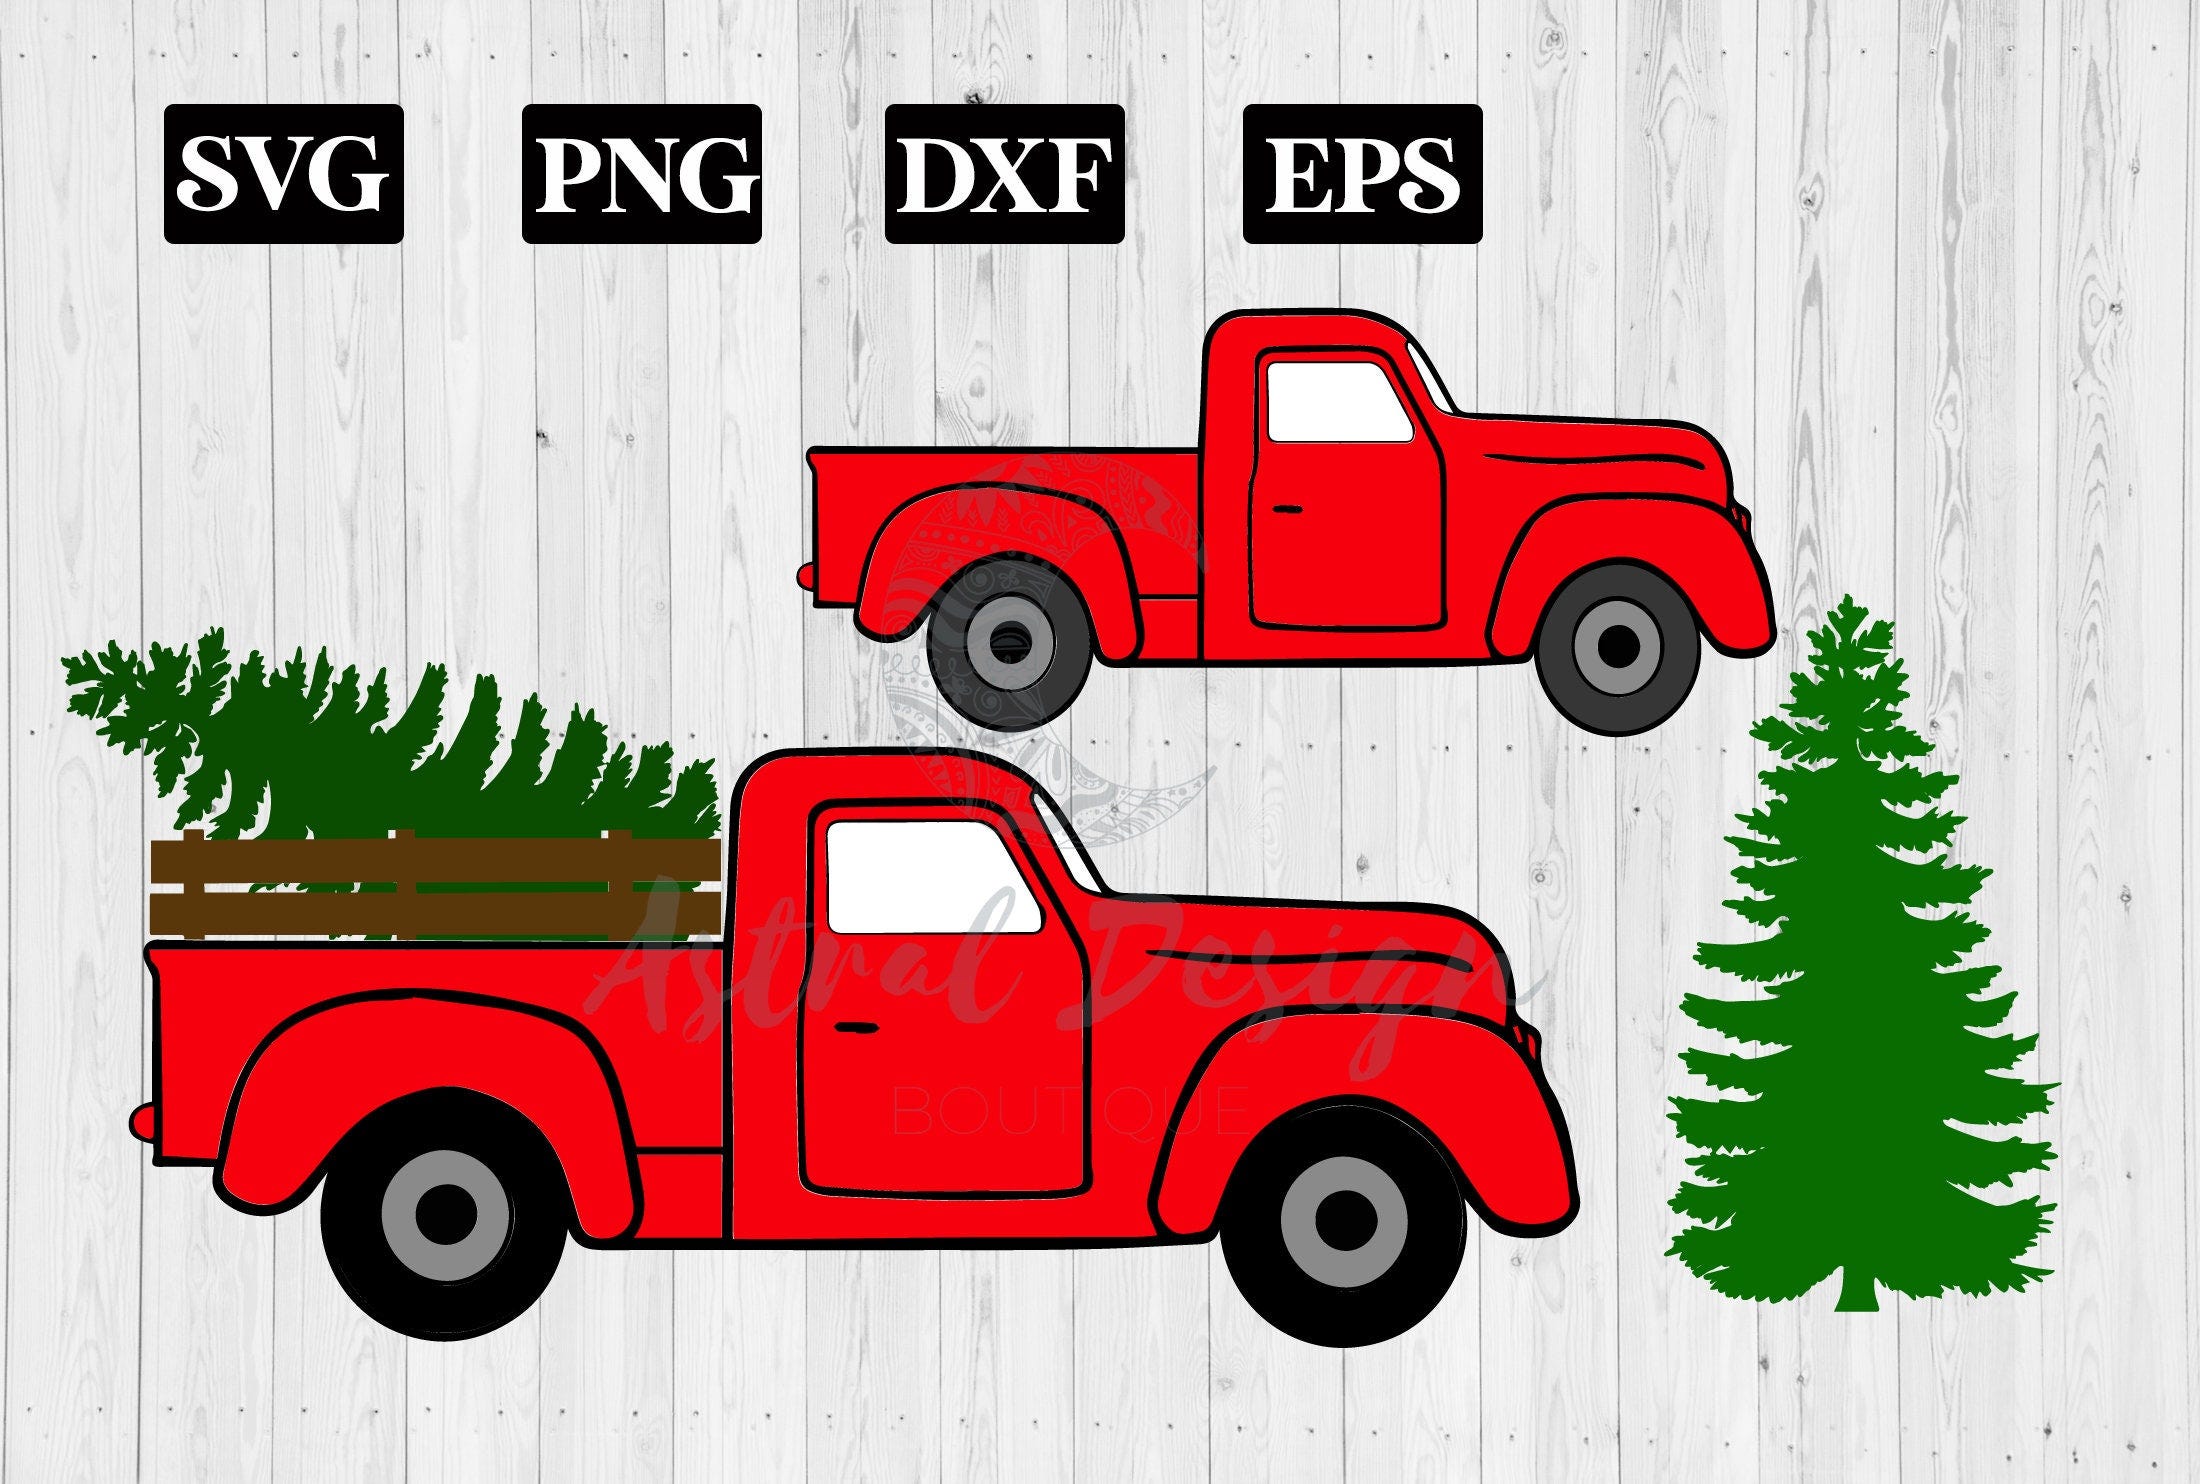 Antique Truck Christmas Tree SVG, Vintage Truck PNG, Cut Files for Cricut Silhouette, Antique Truck Tree Clipart, Christmas Clipart